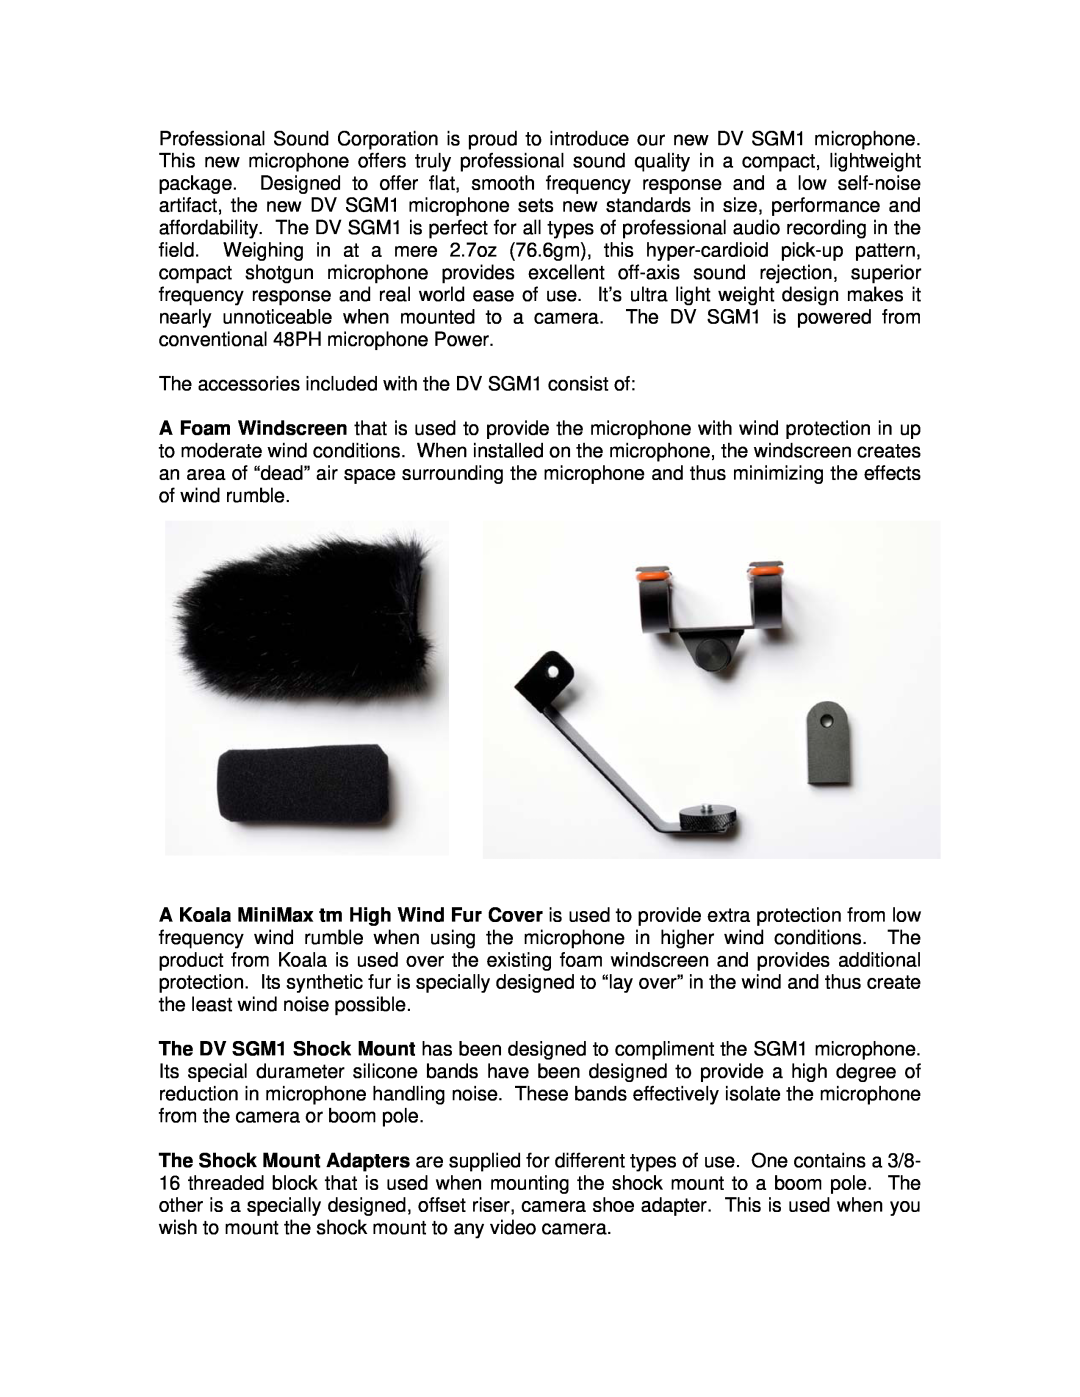 PSC manual The accessories included with the DV SGM1 consist of 